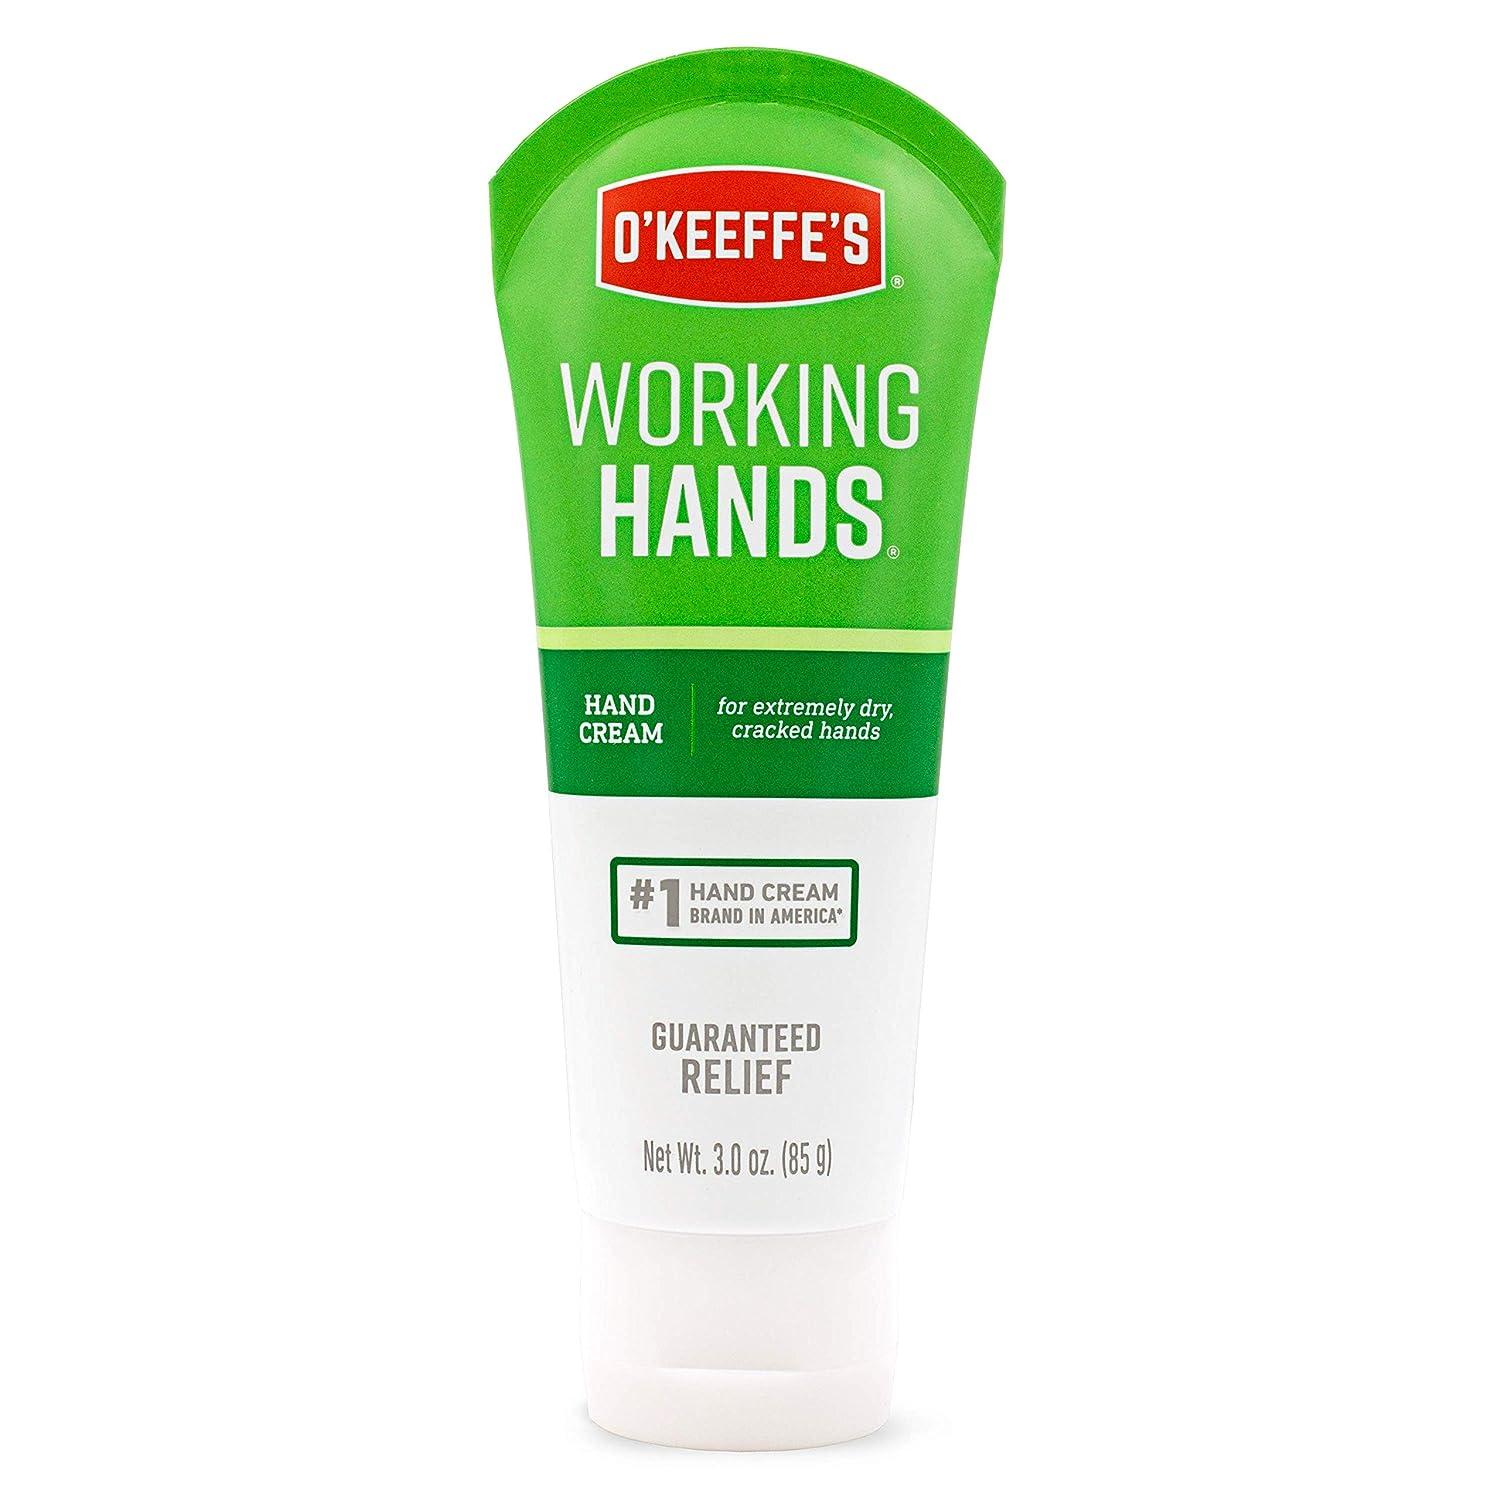 O'Keeffe's Working Hands Hand Soap, 12oz 4-Pack - Dutch Goat